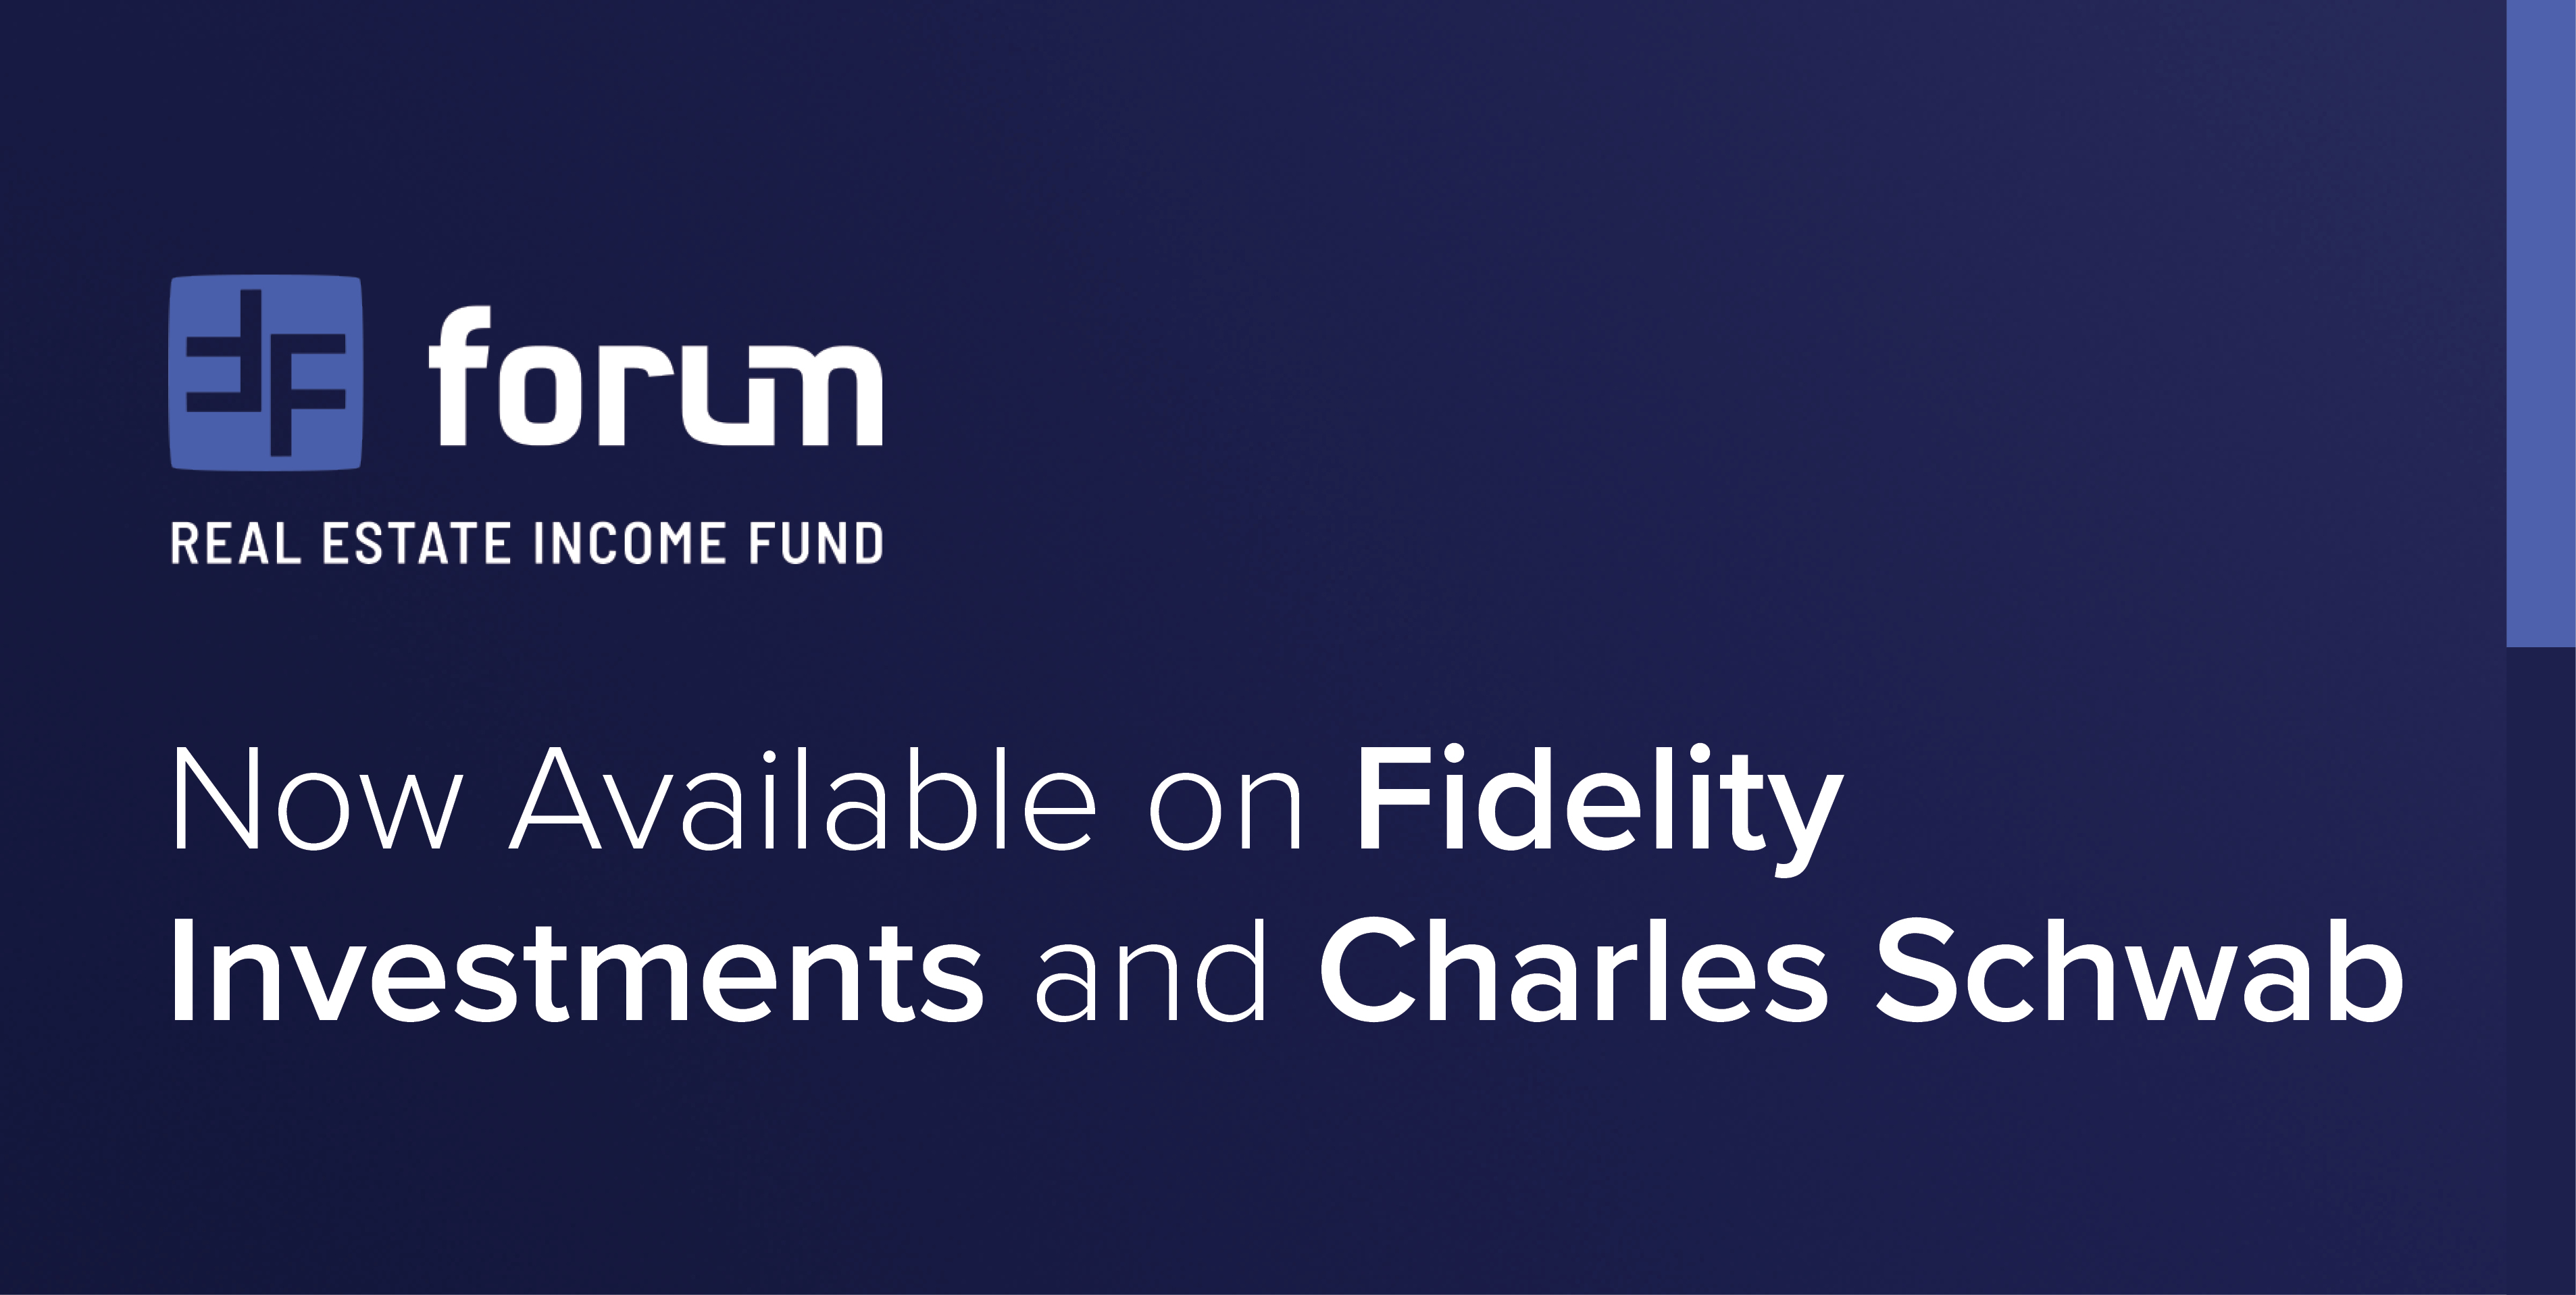 Forum Capital Advisors Announces Interval Fund (FORAX) Now Available For Purchase Via Fidelity Investments and Charles Schwab